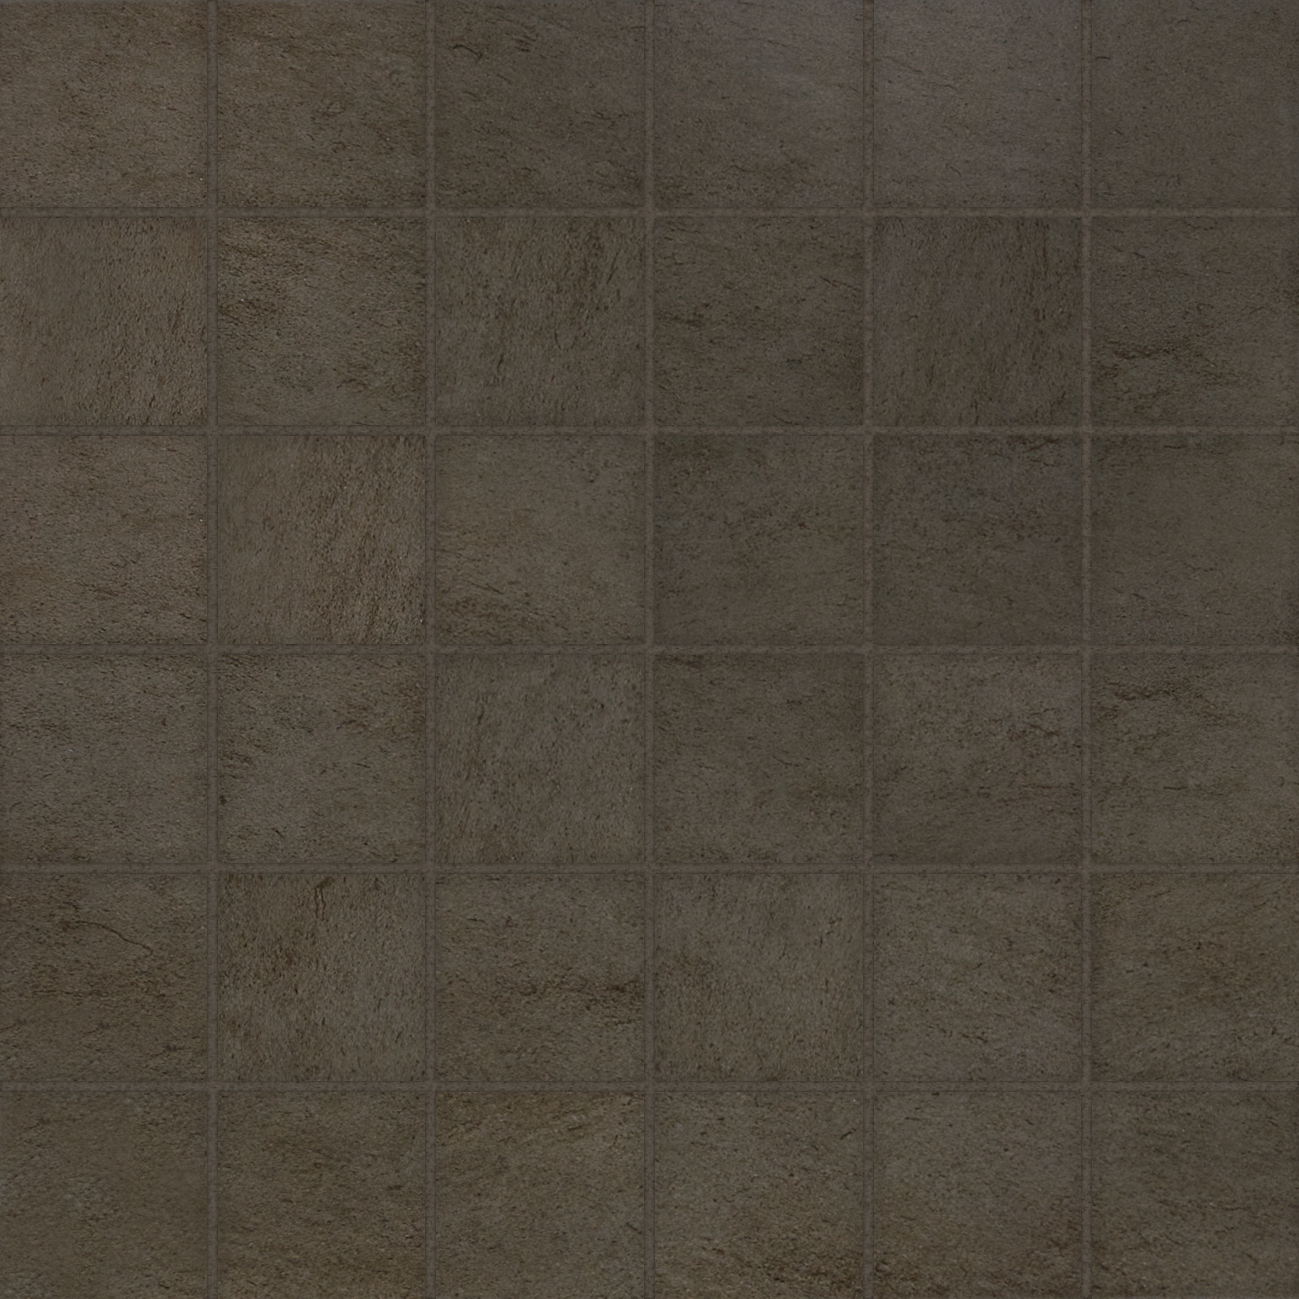 brown straight stack 2x2-inch pattern glazed ceramic mosaic from cinq anatolia collection distributed by surface group international matte finish straight edge edge mesh shape